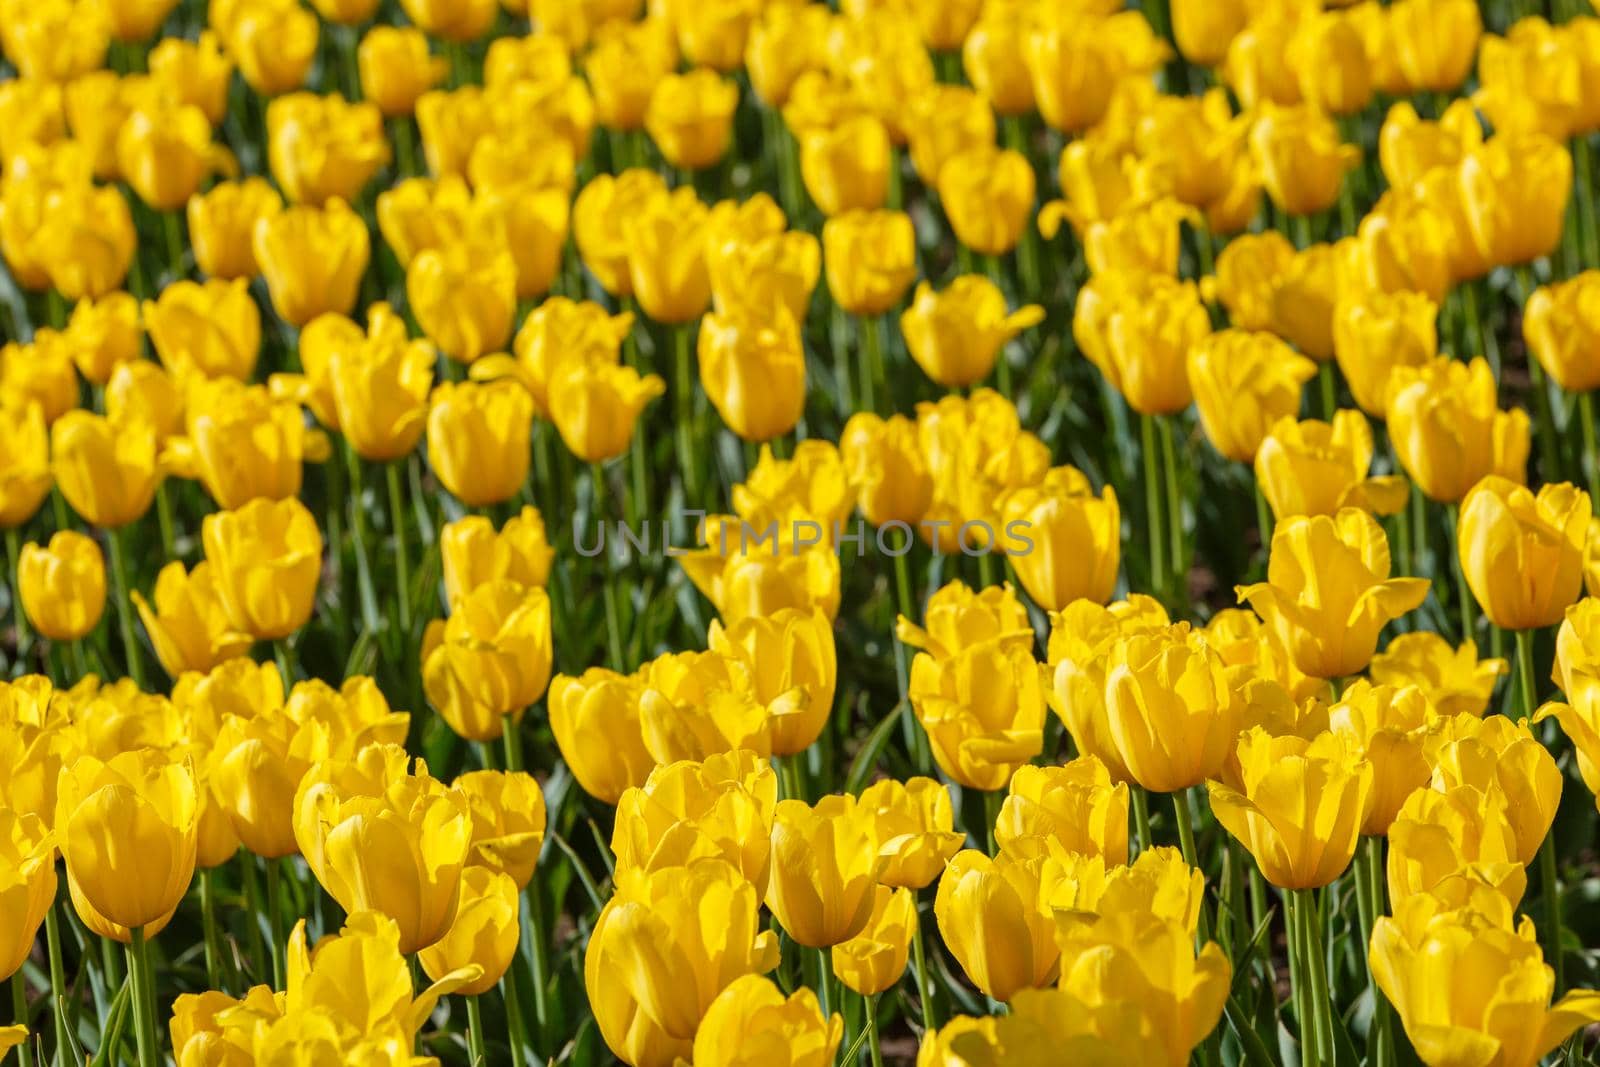 flaccid yellow tulips in the field at spring daylight - close-up full frame background with selective focus